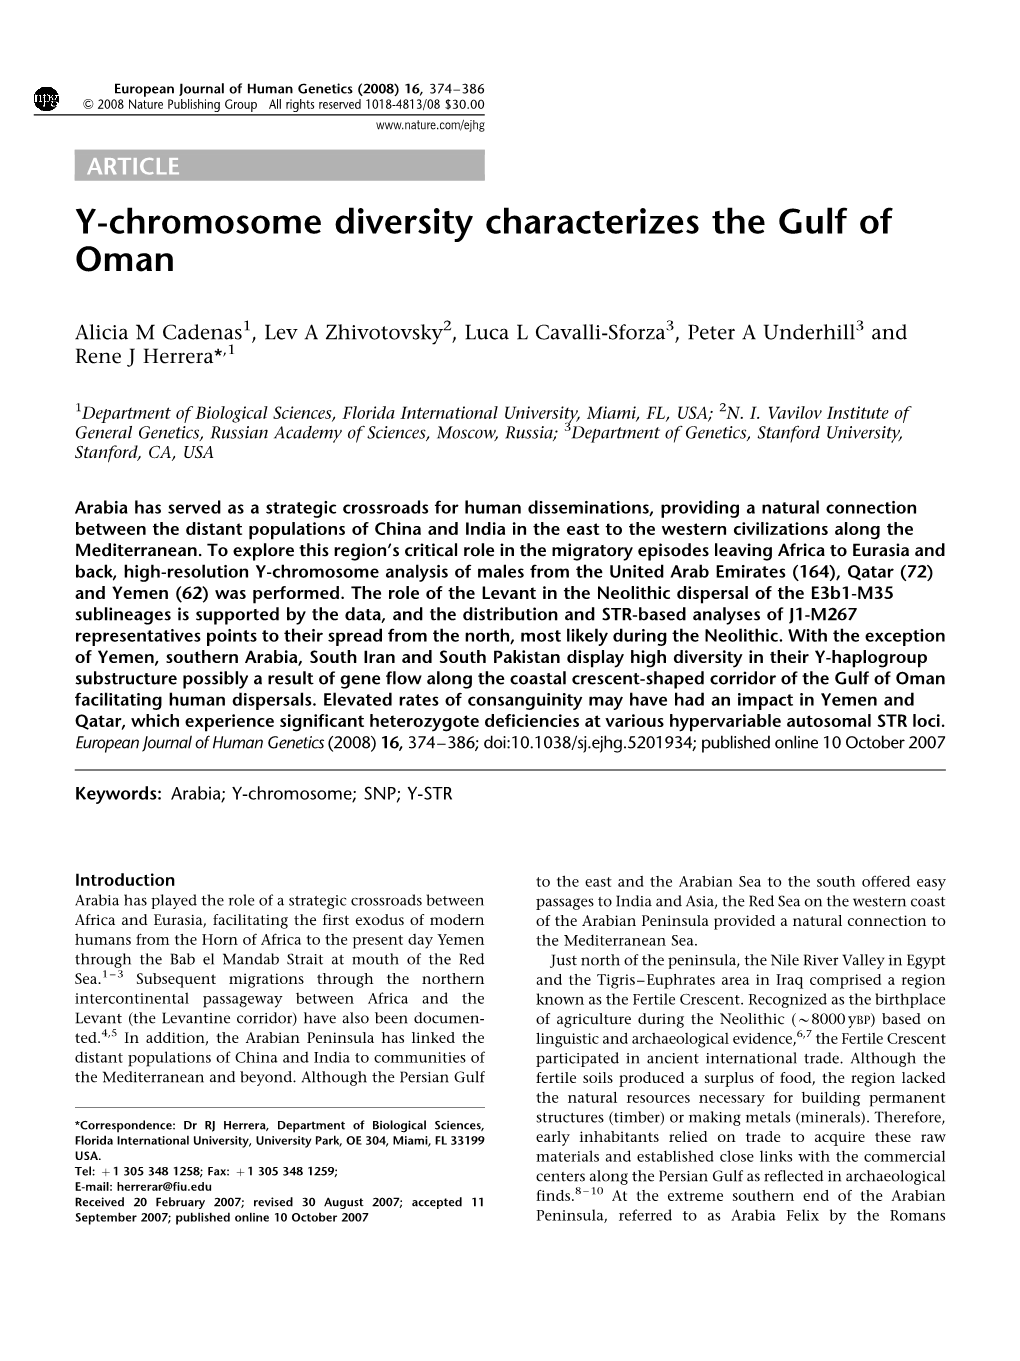 Y-Chromosome Diversity Characterizes the Gulf of Oman